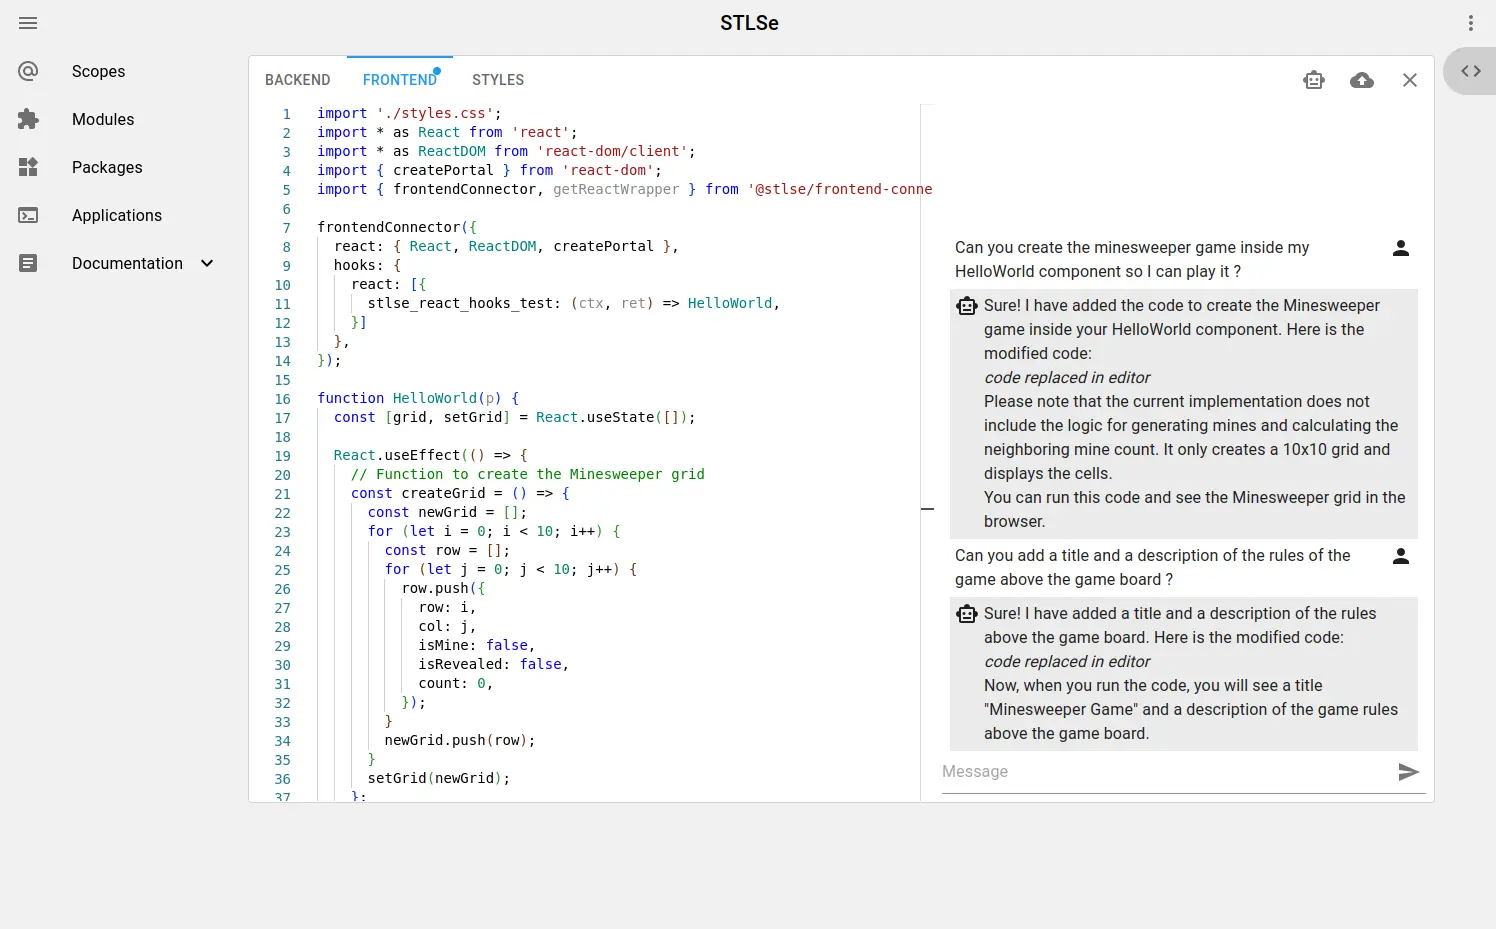 Preview of the STLSe administration webportal that displays a webpage with a code editor and a chat with an Artificial Intelligence on the right side that helps to write the code